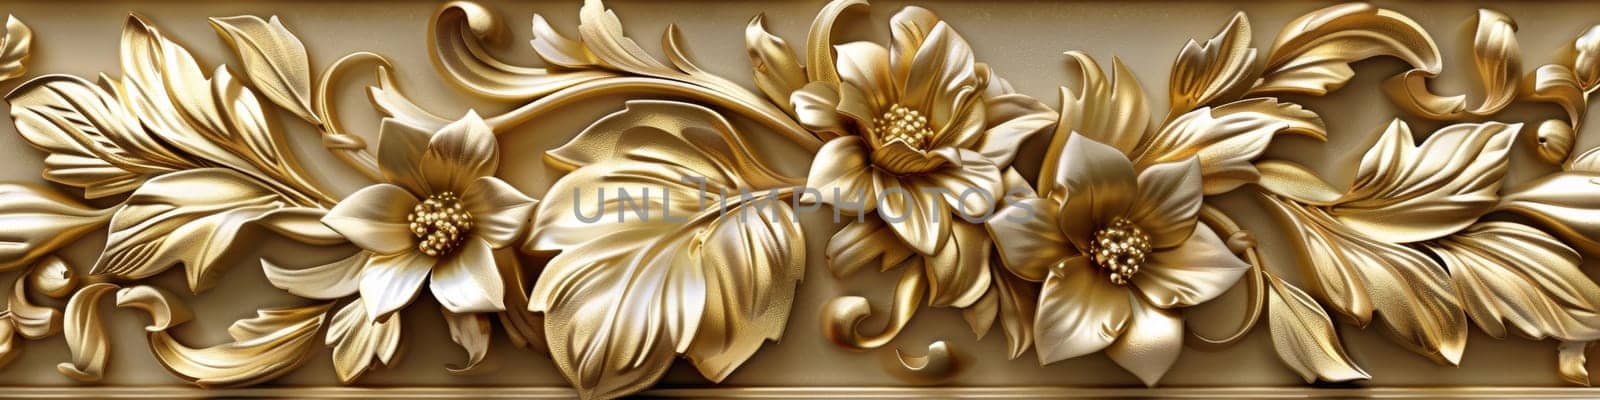 A close up of a decorative wall with gold flowers